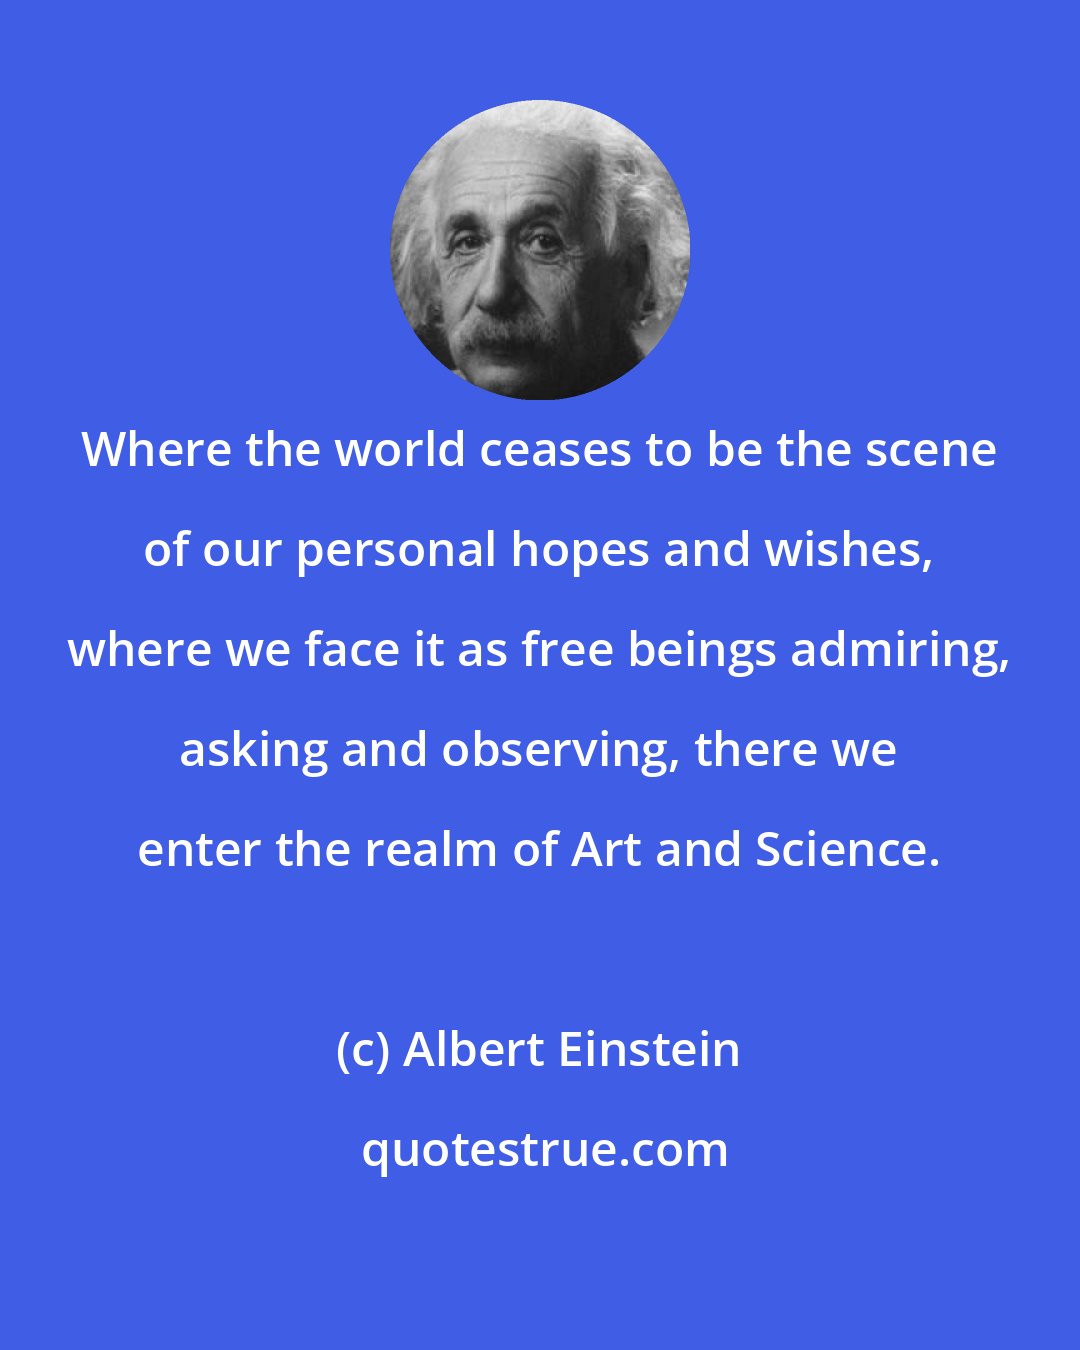 Albert Einstein: Where the world ceases to be the scene of our personal hopes and wishes, where we face it as free beings admiring, asking and observing, there we enter the realm of Art and Science.